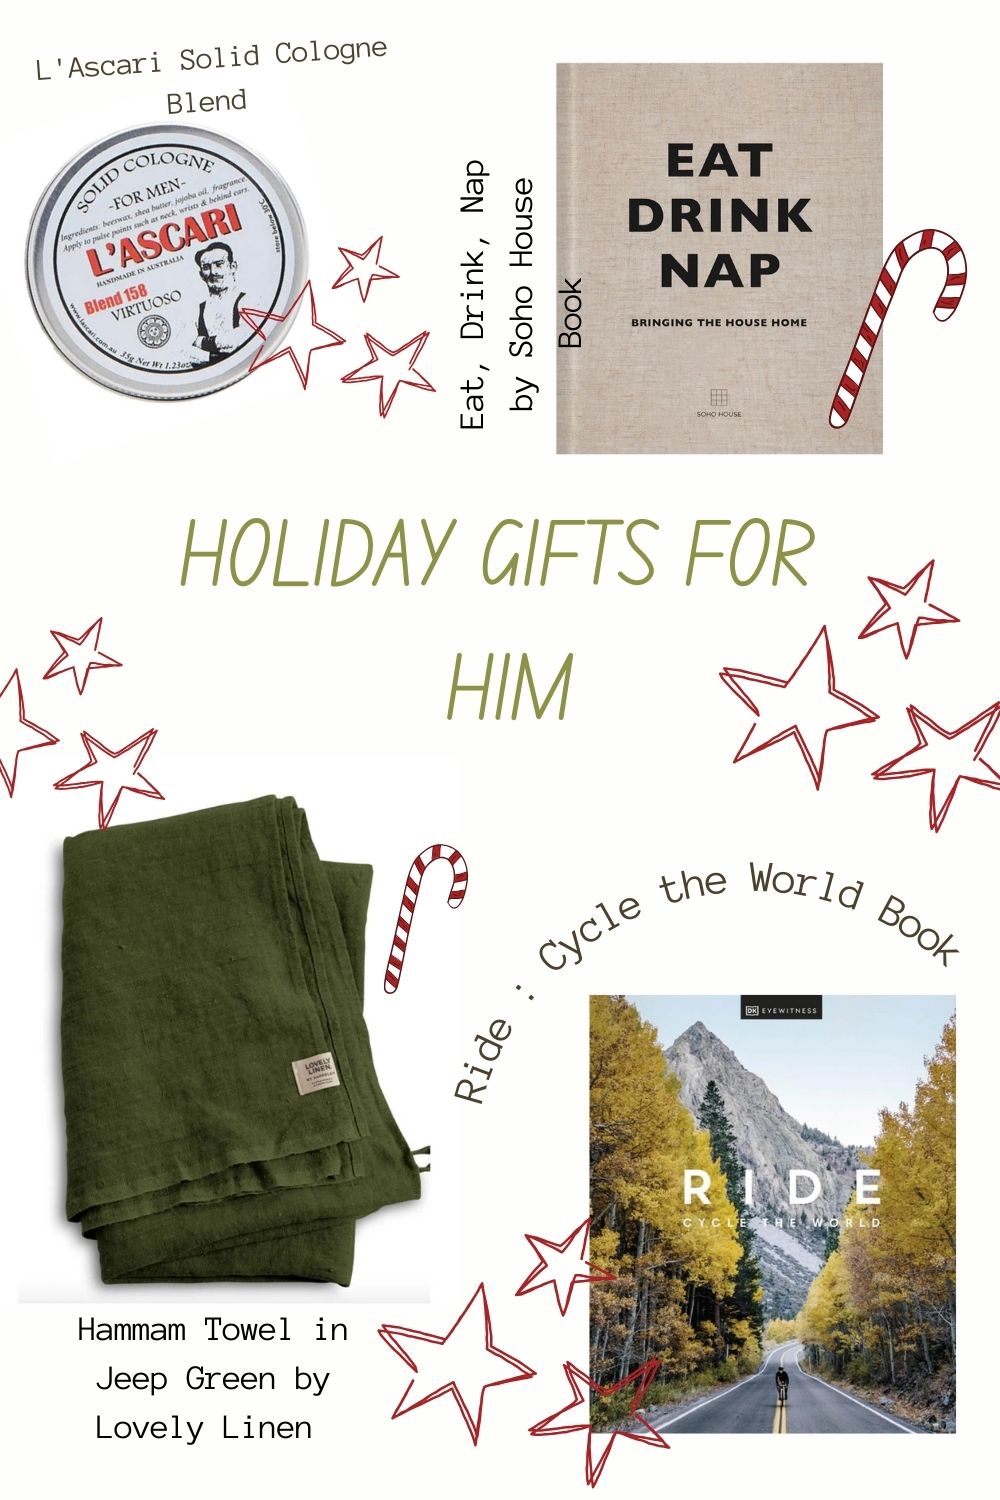 FOR HIM GIFT GUIDE